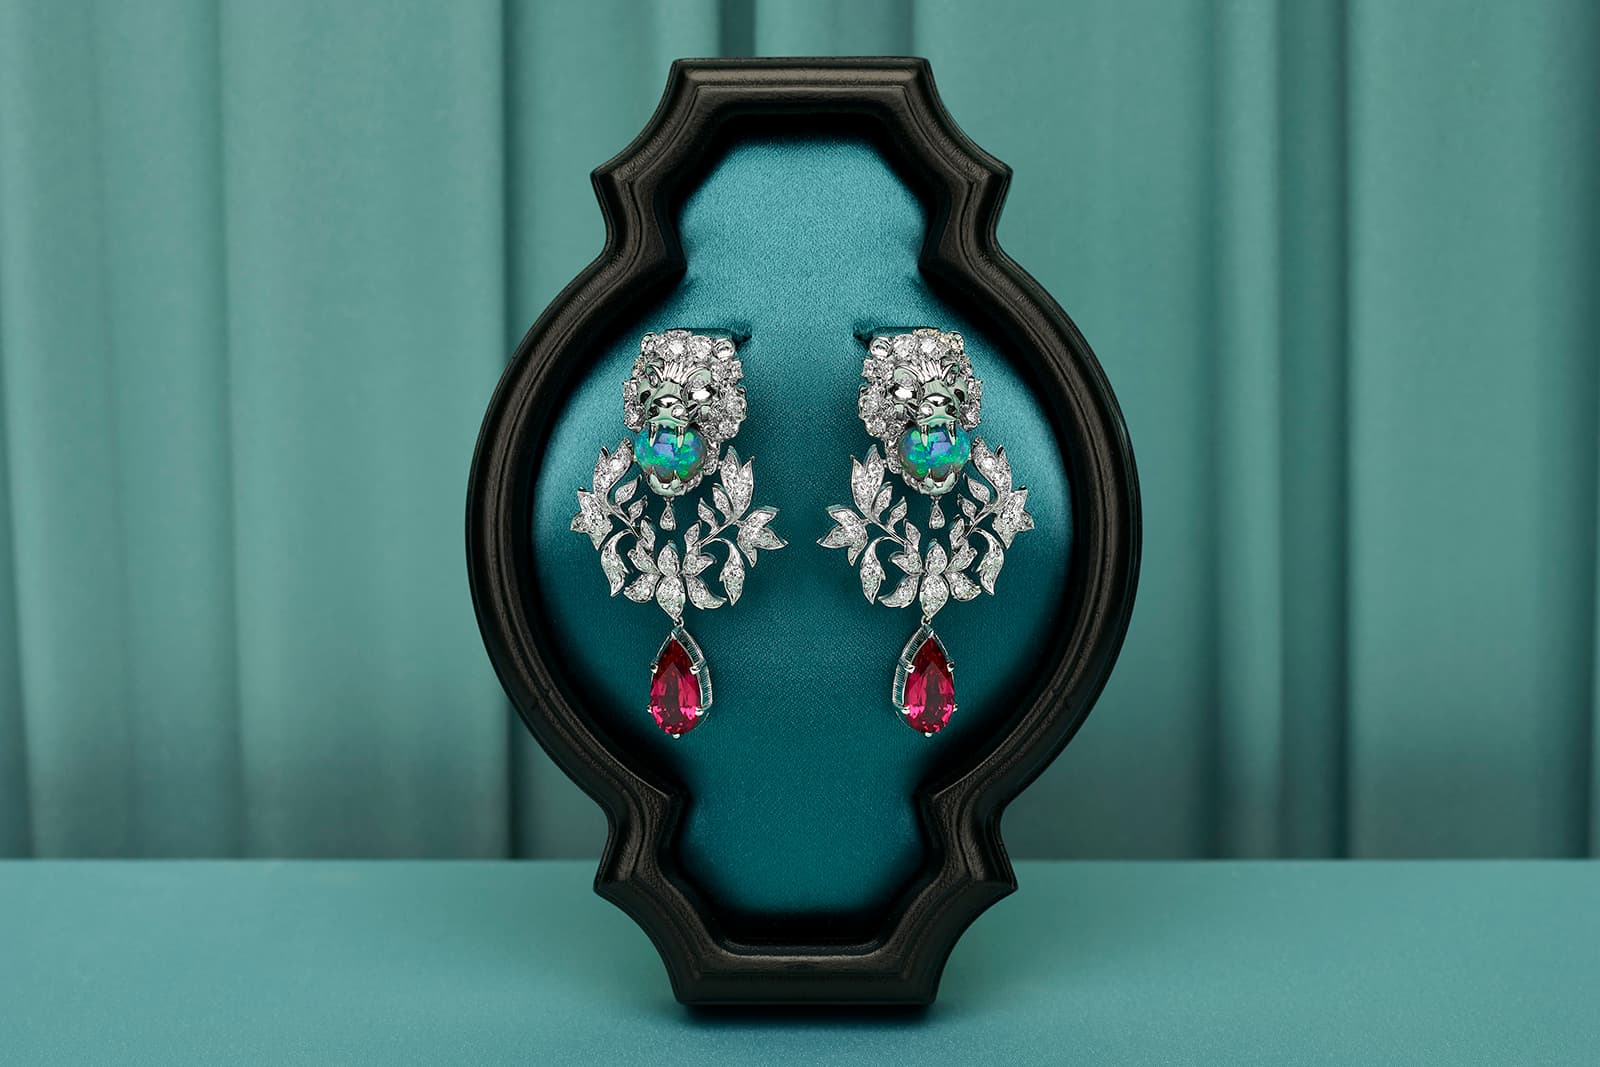 Gucci 'Hortus Deliciarum’ collection 'Animal Kingdom' earrings with opals, rubellites and diamonds in white gold